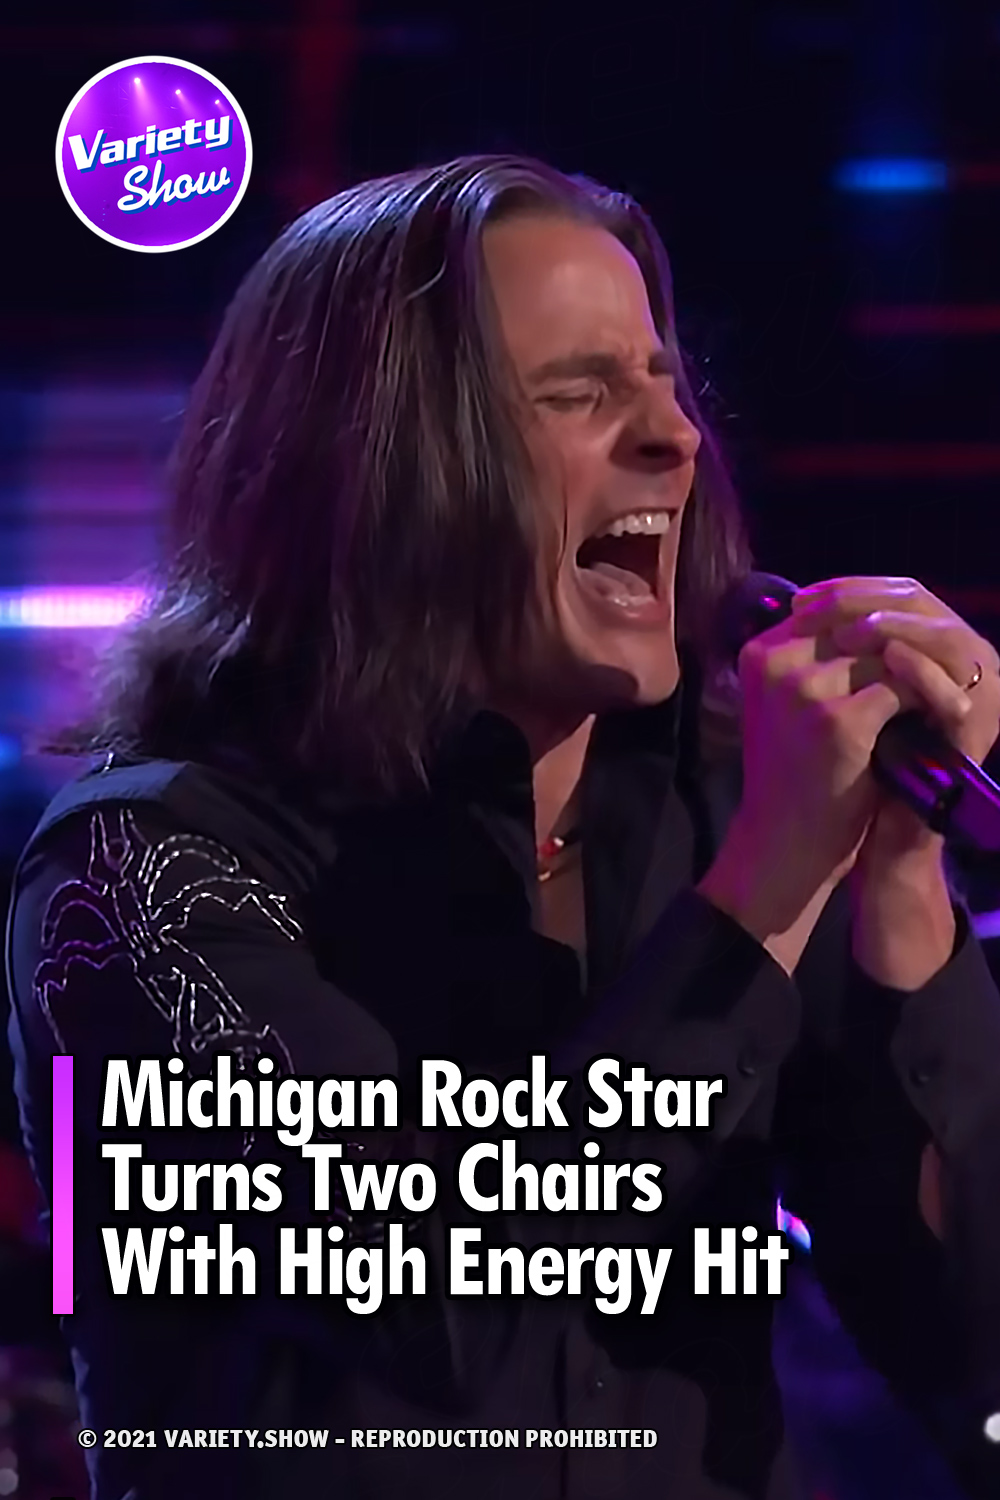 Michigan Rock Star Turns Two Chairs With High Energy Hit